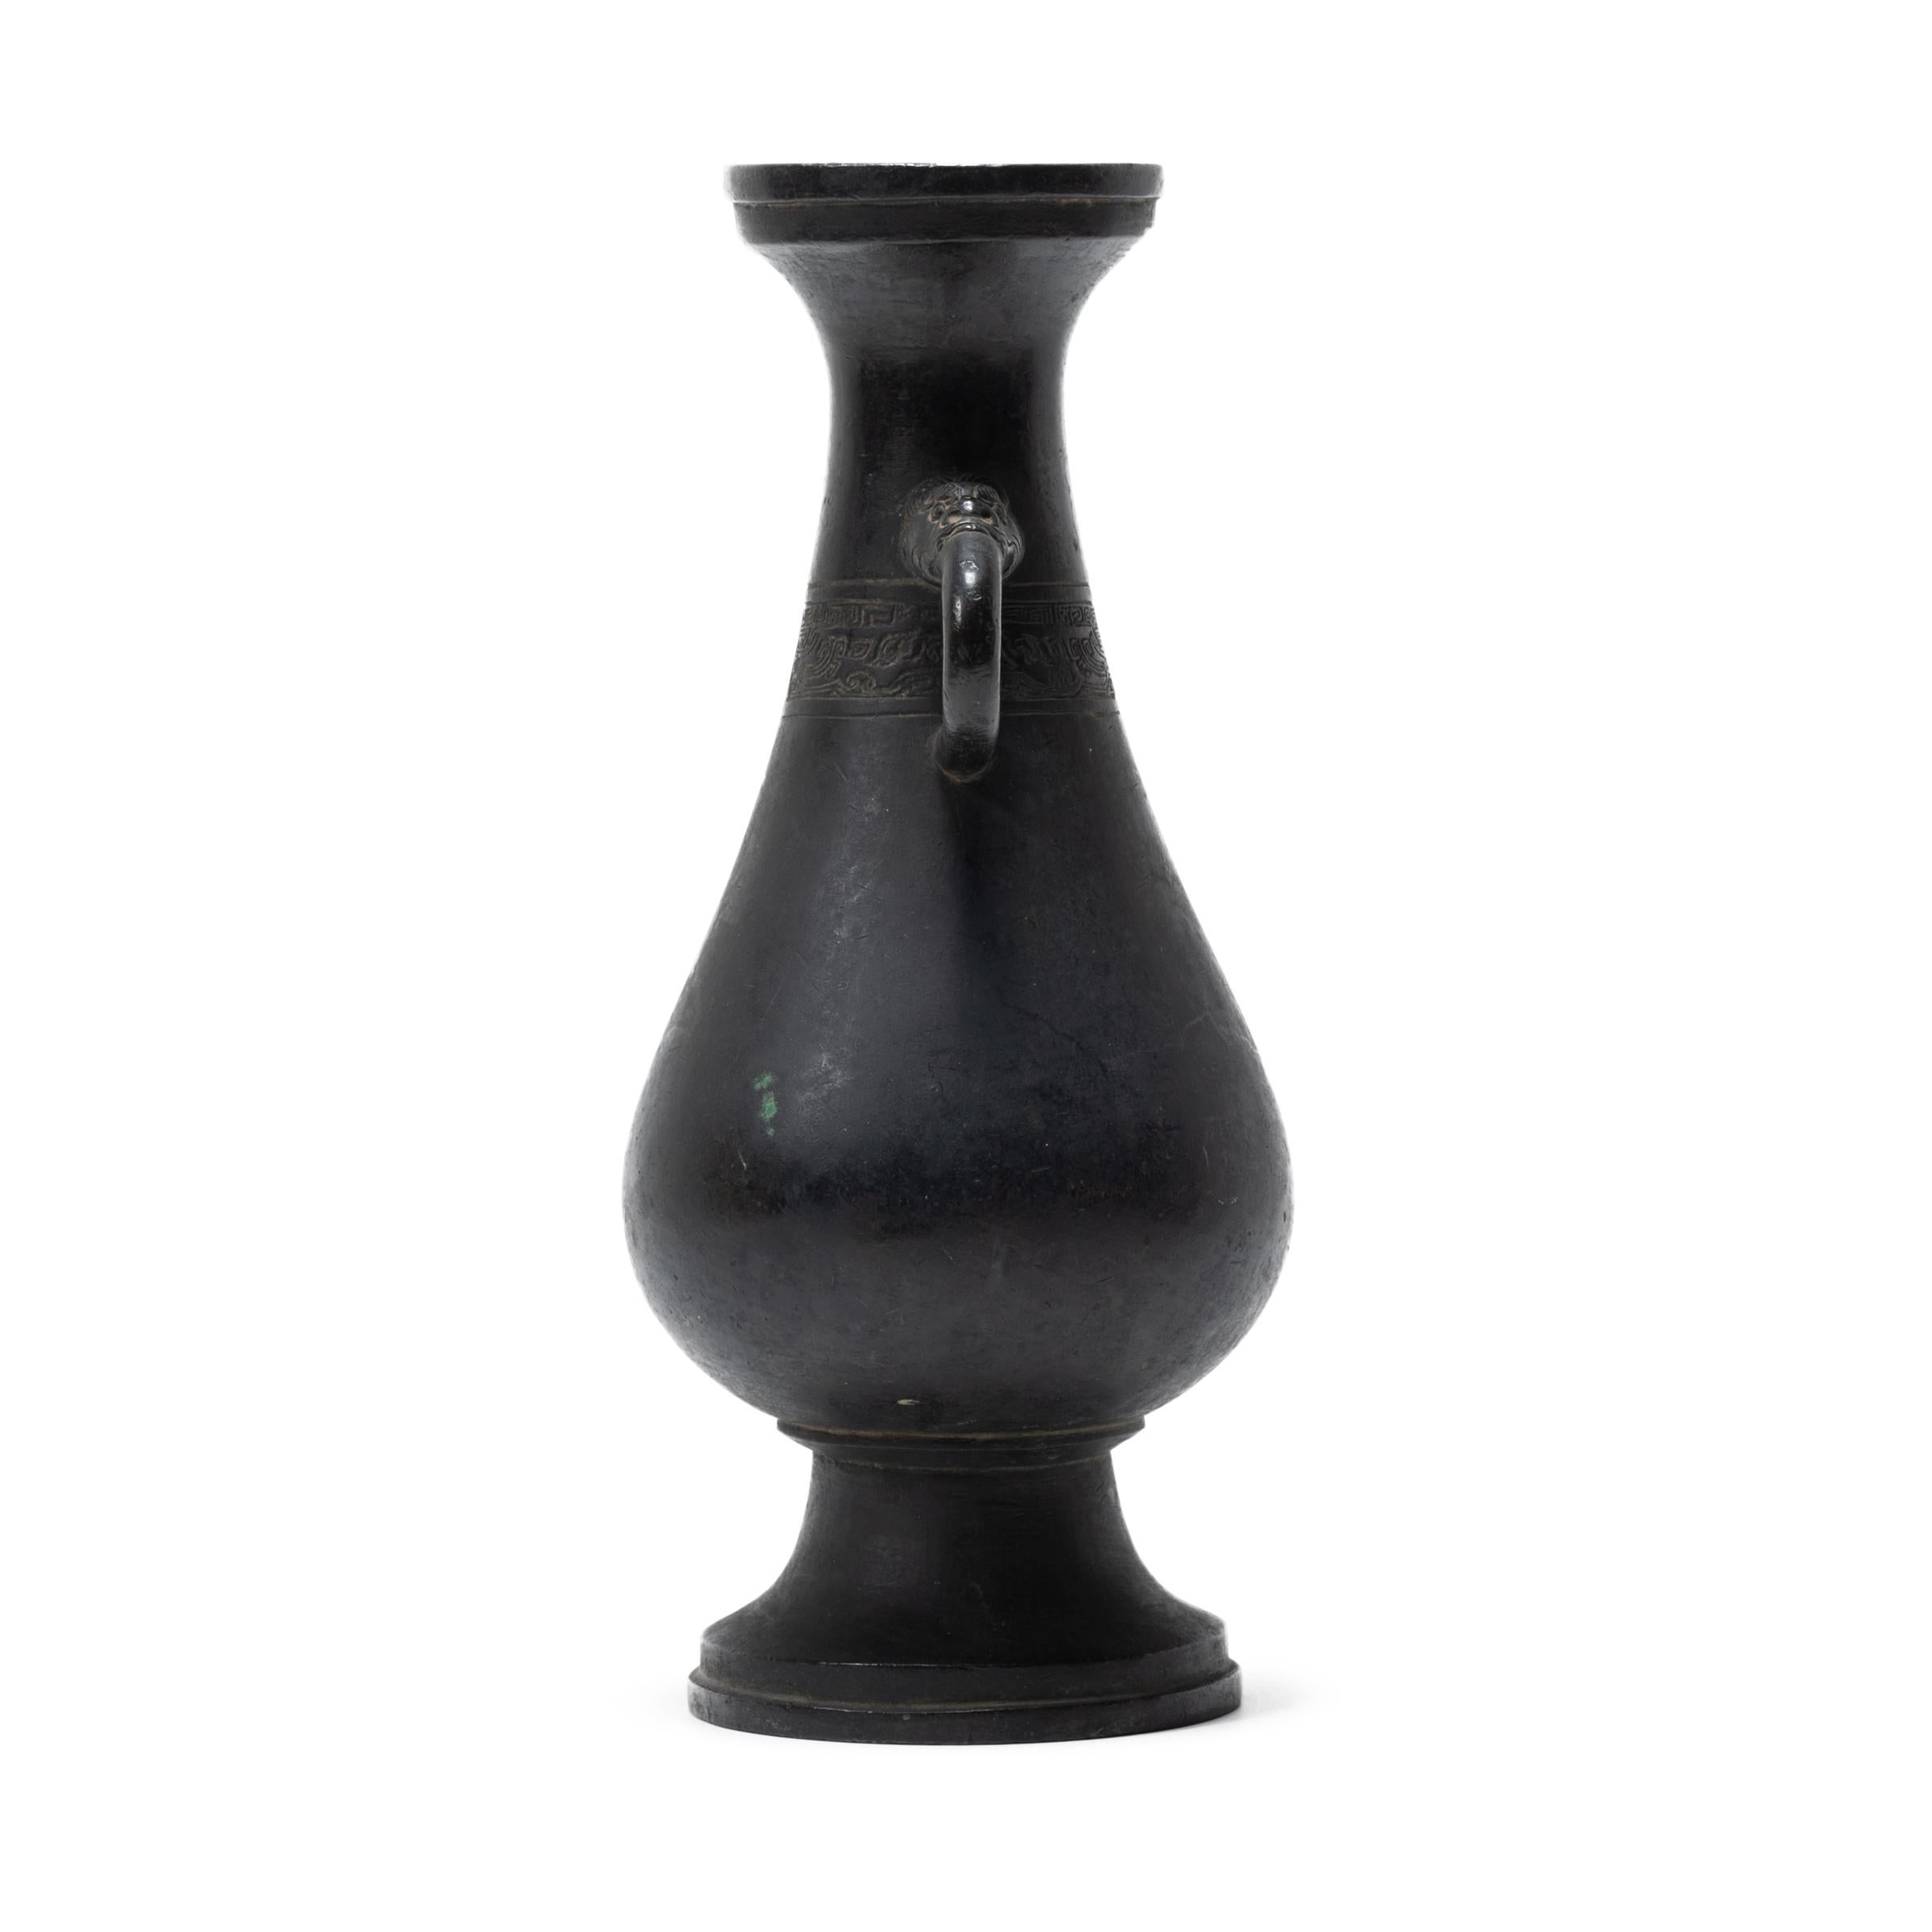 This late 17th century bronze vase is reminiscent of the ritual bronzes used by China’s earliest rulers. The vase was cast over 400 years ago during the Ming dynasty, an era when artisans were inspired by the ancient past and relied on traditional